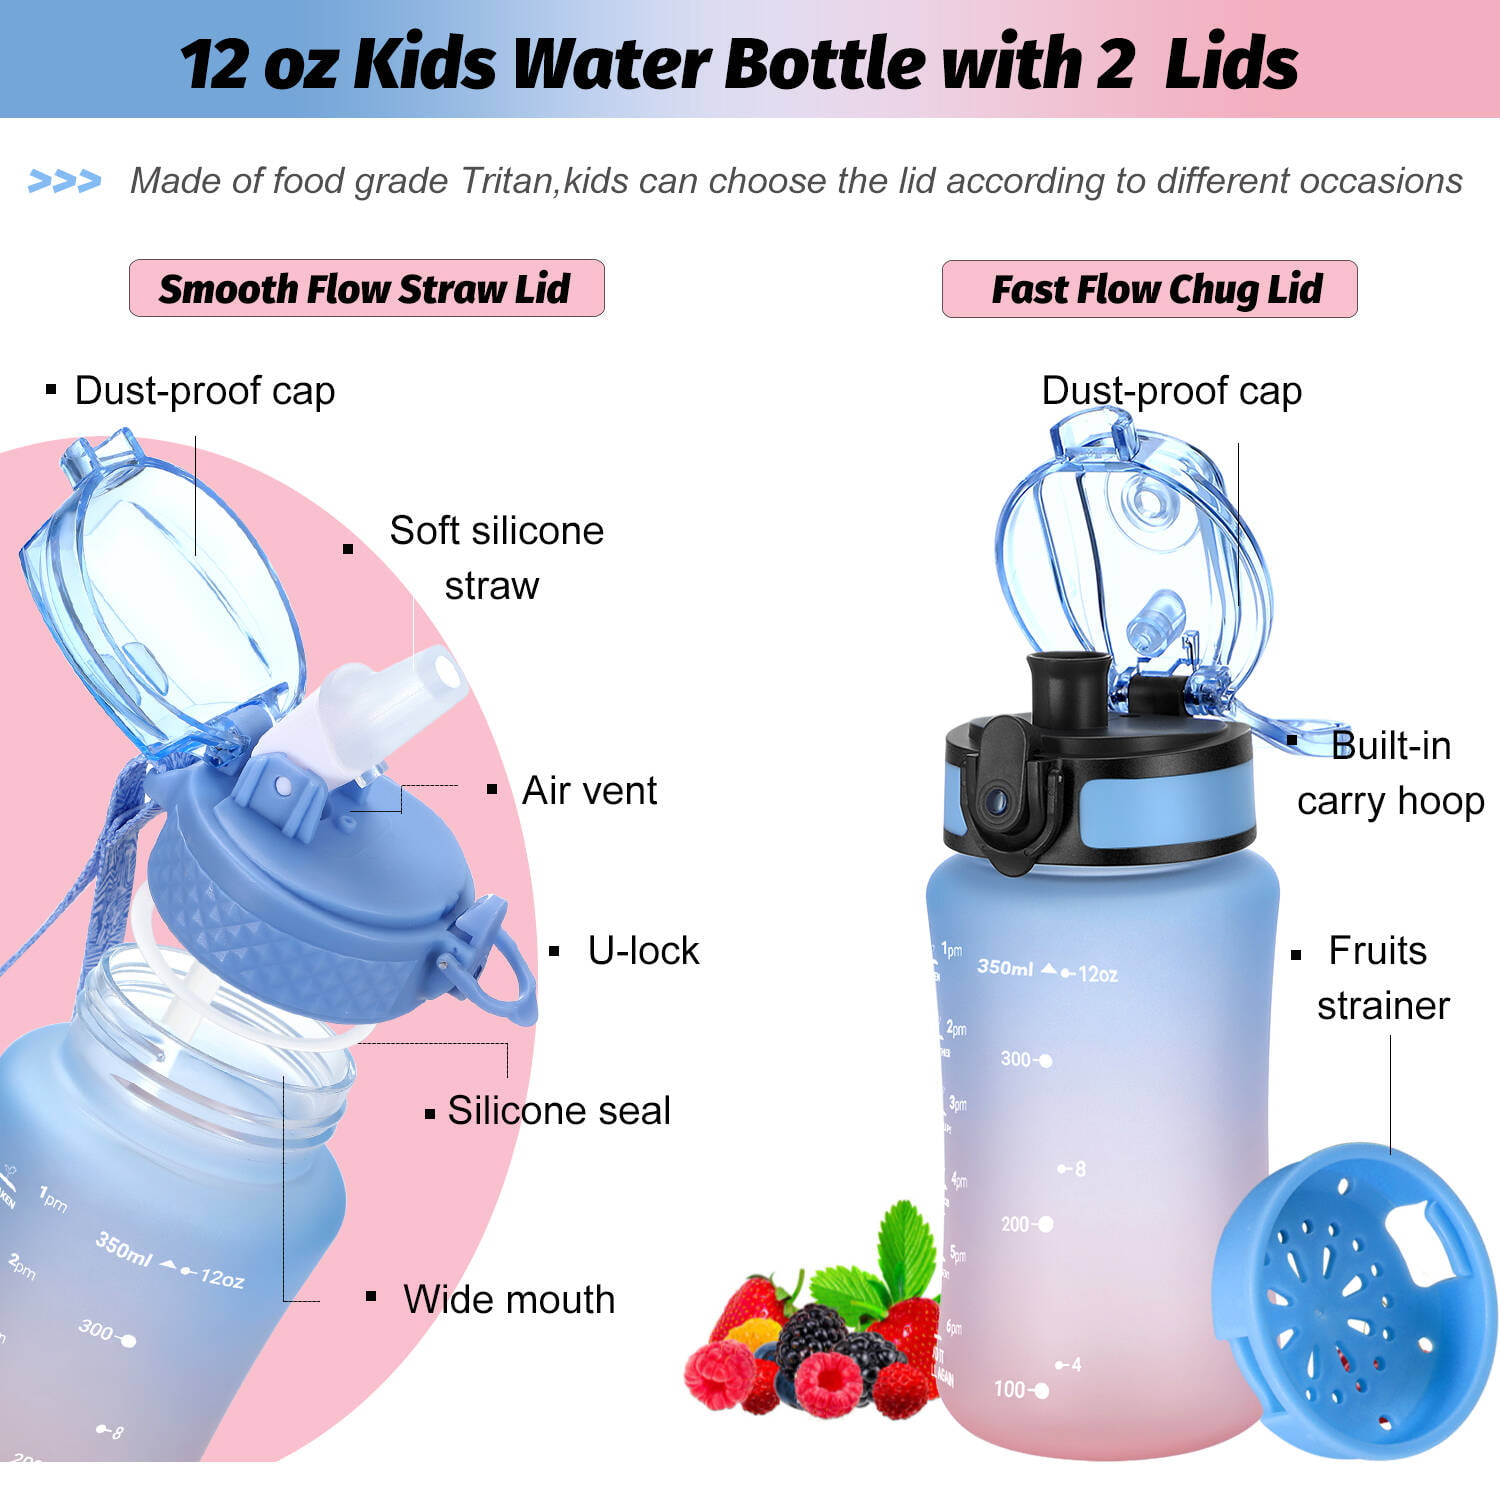 Anti-Spill Baby Bottle with Drinking Cup for Toddlers – TheToddly